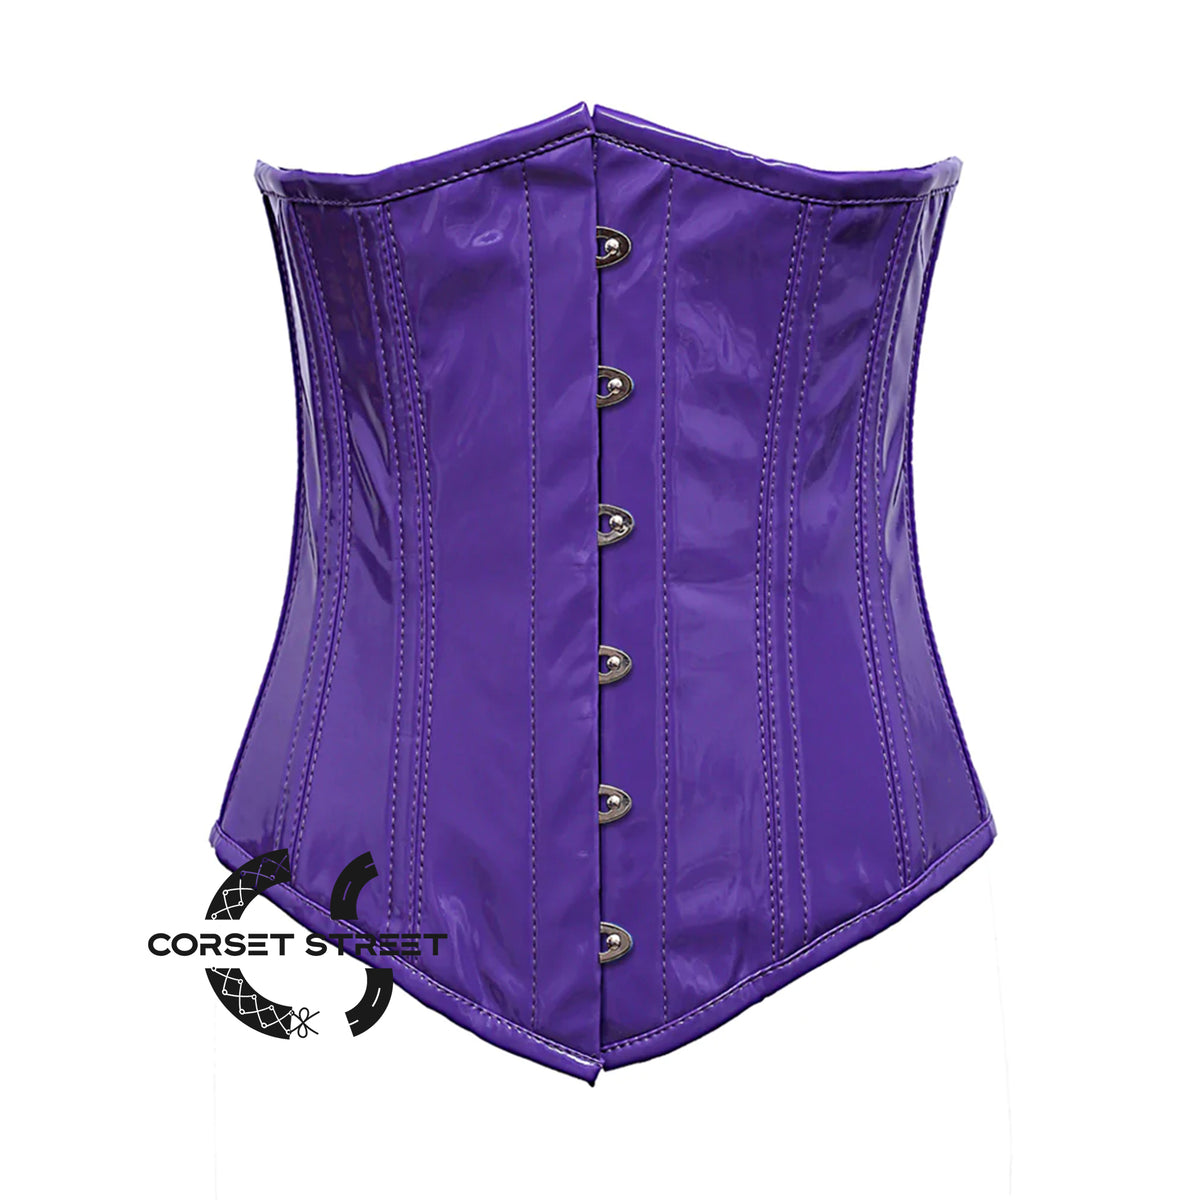 PVC Leather With Front Silver Busk Gothic Long Underbust Waist Training Corset